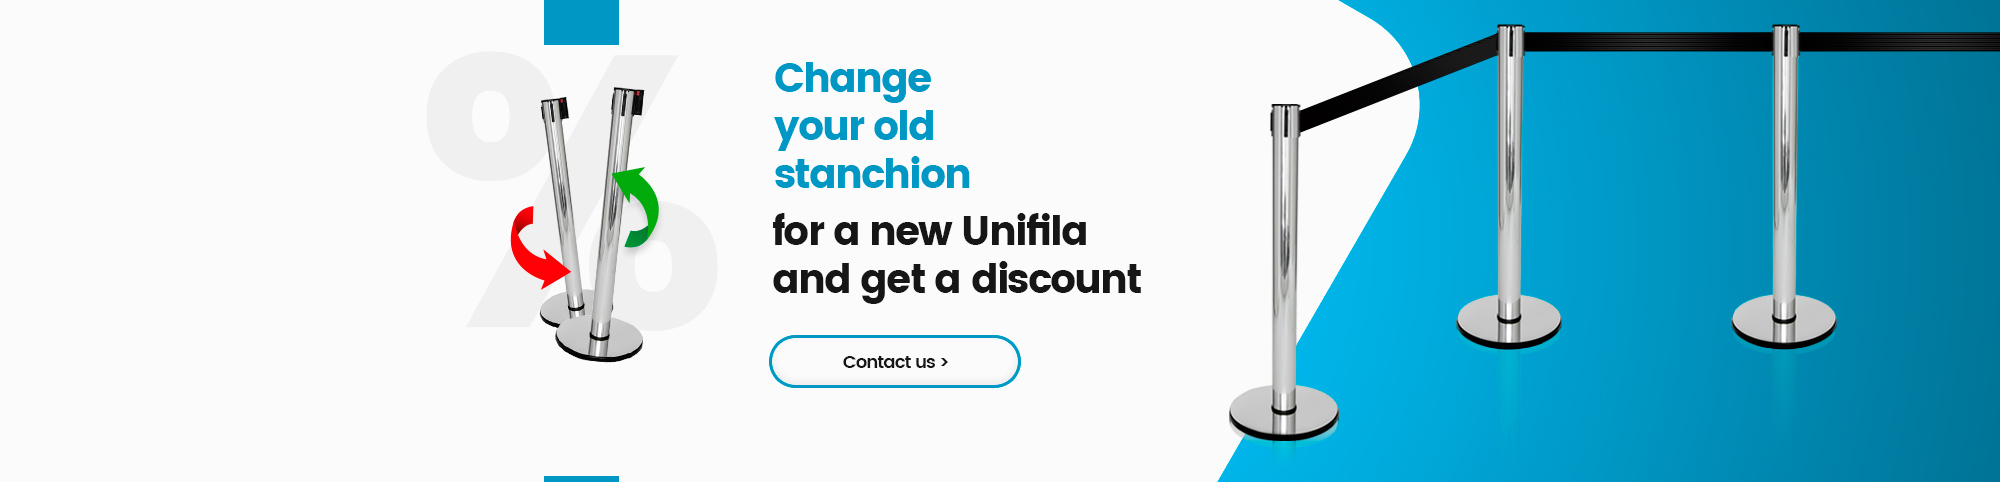 Change your old stanchion for a new Unifila ang get a discount!